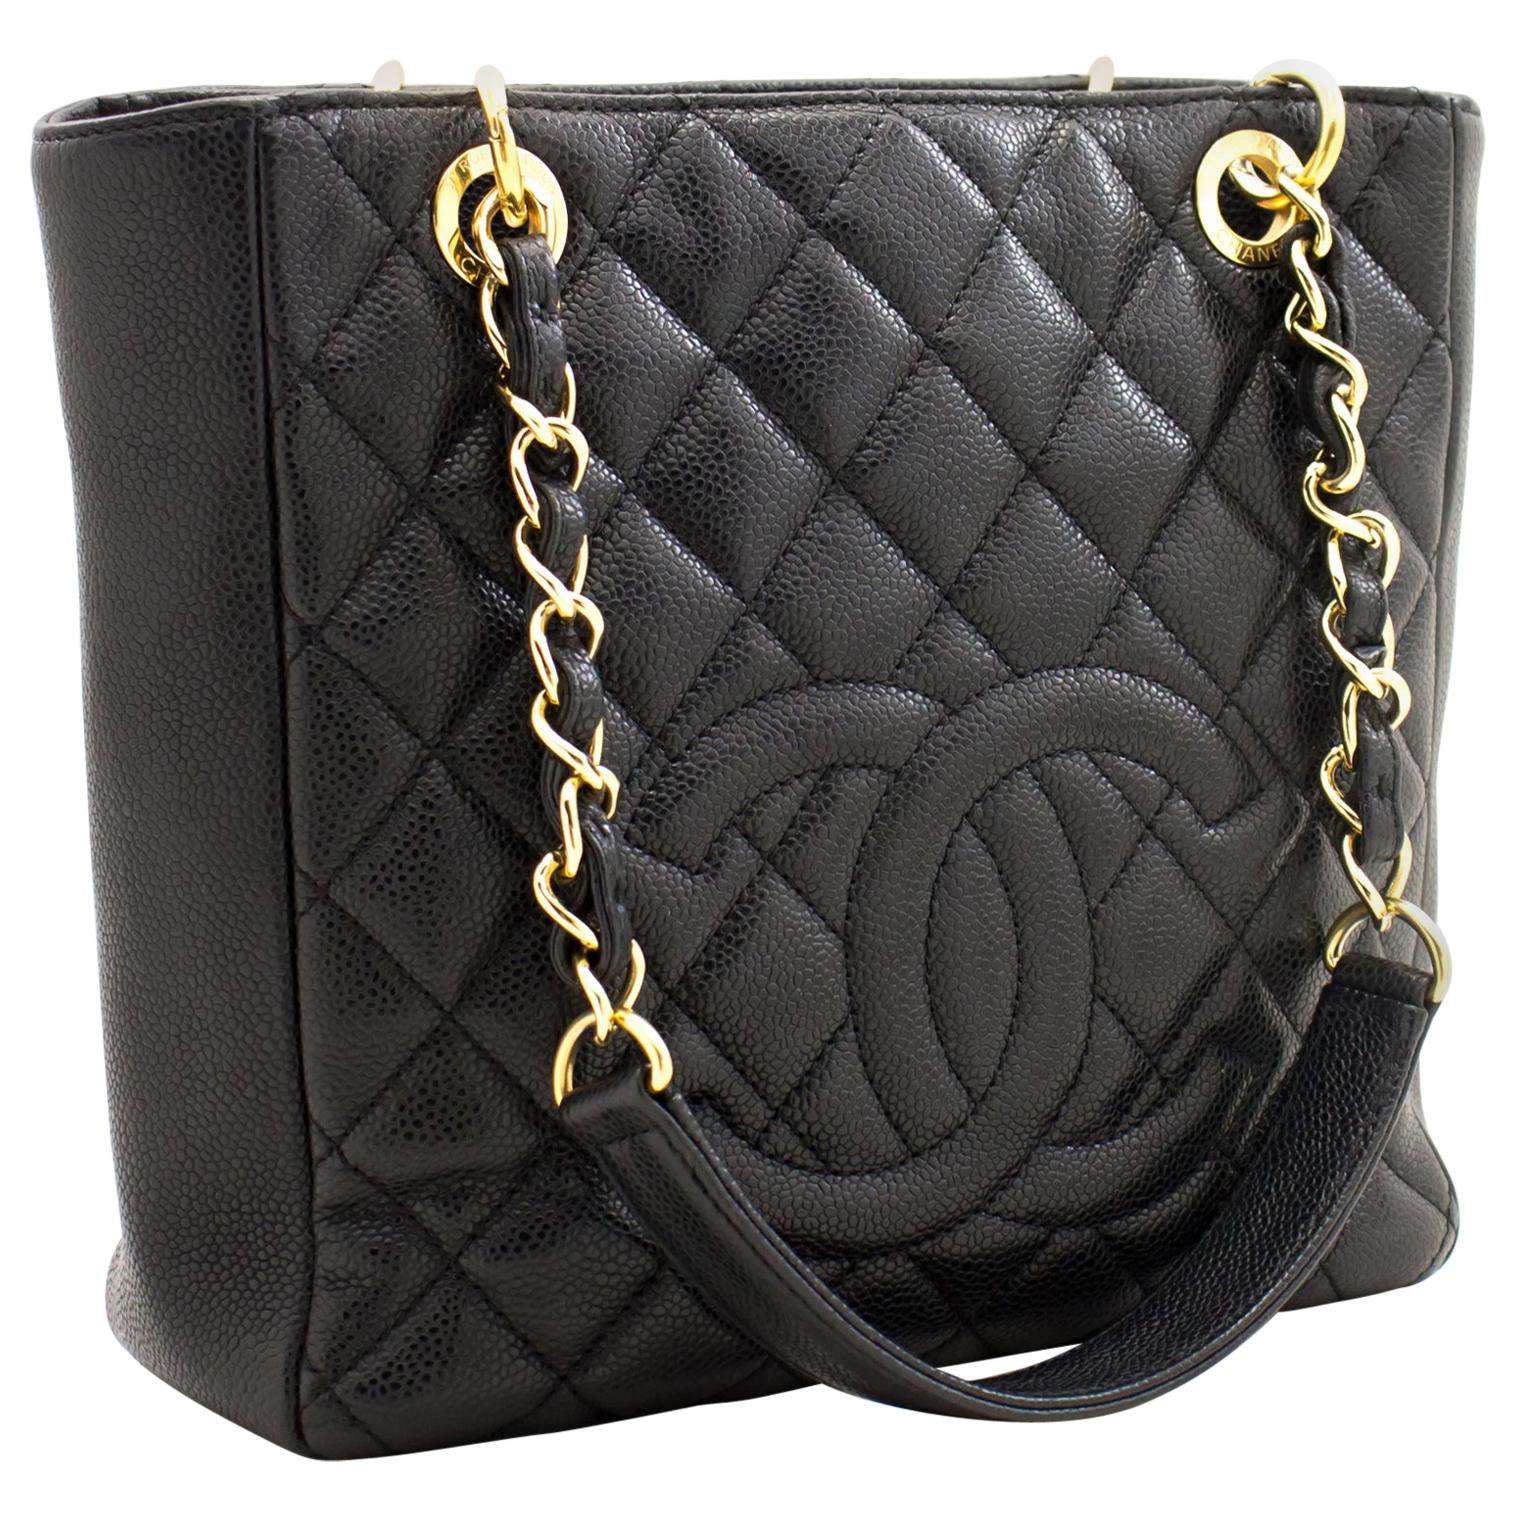 CHANEL Caviar PST Chain Shoulder Shopping Tote Bag Black Quilted